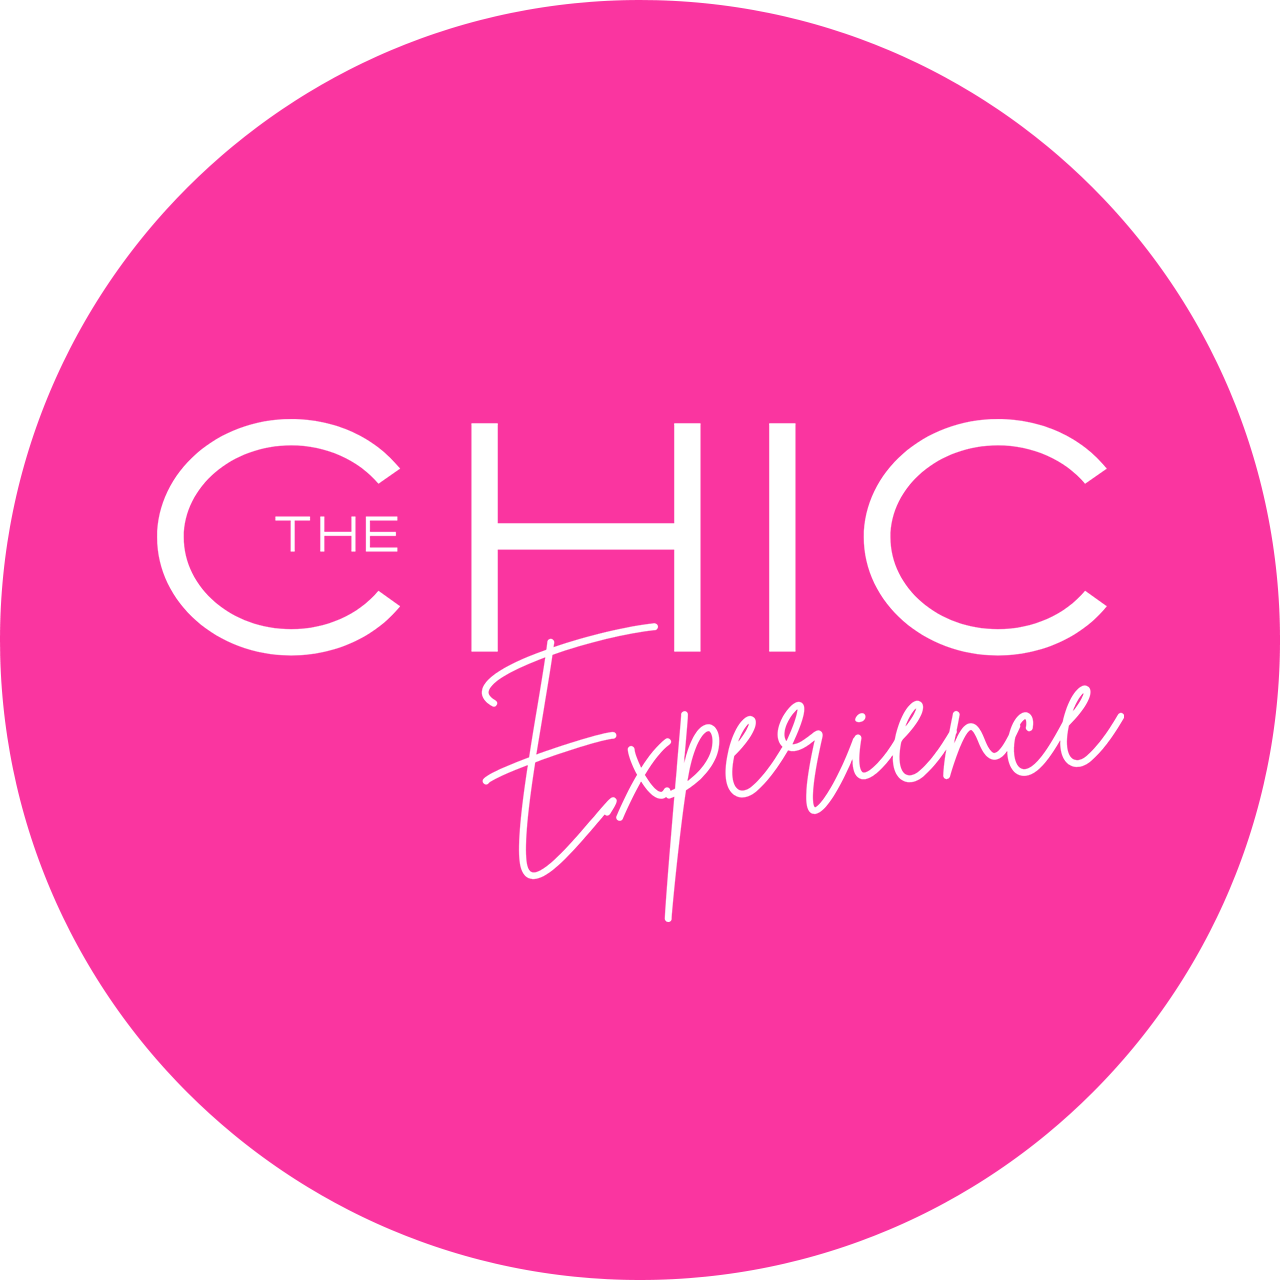 Chic Experience Chic Studios